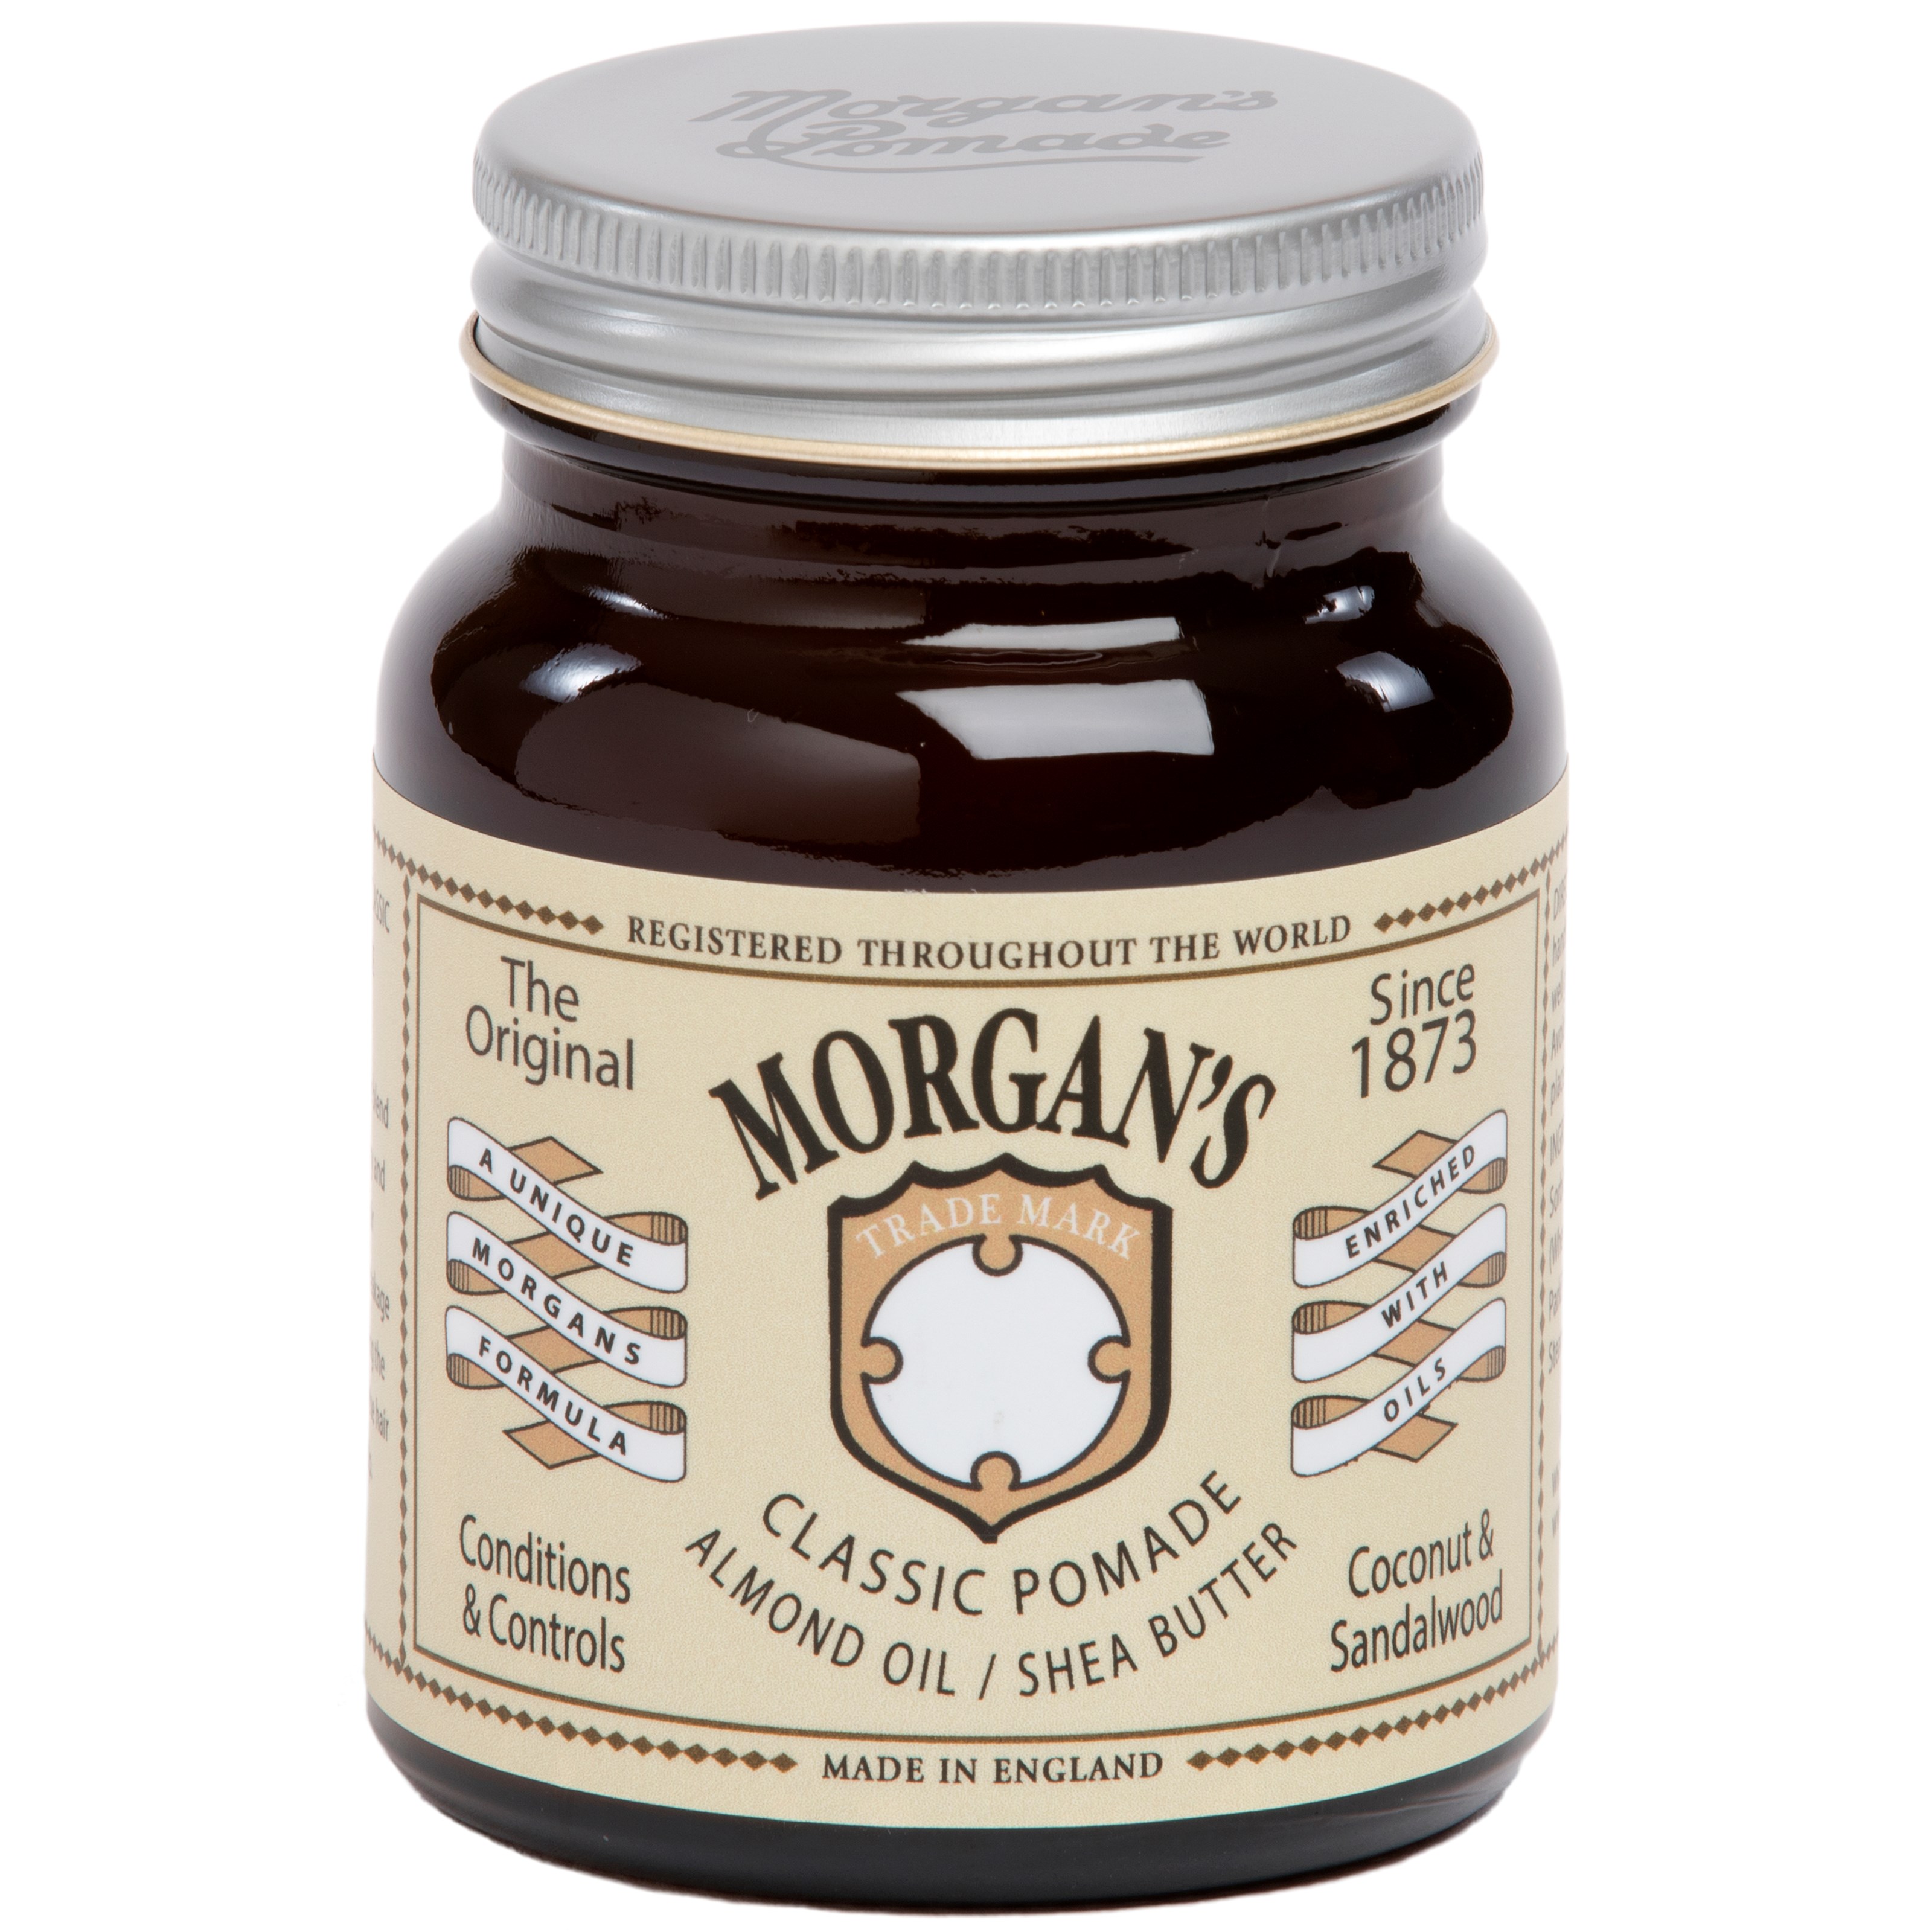 Morgans Pomade Classic Pomade Almond Oil - Shea Butter Cream Label